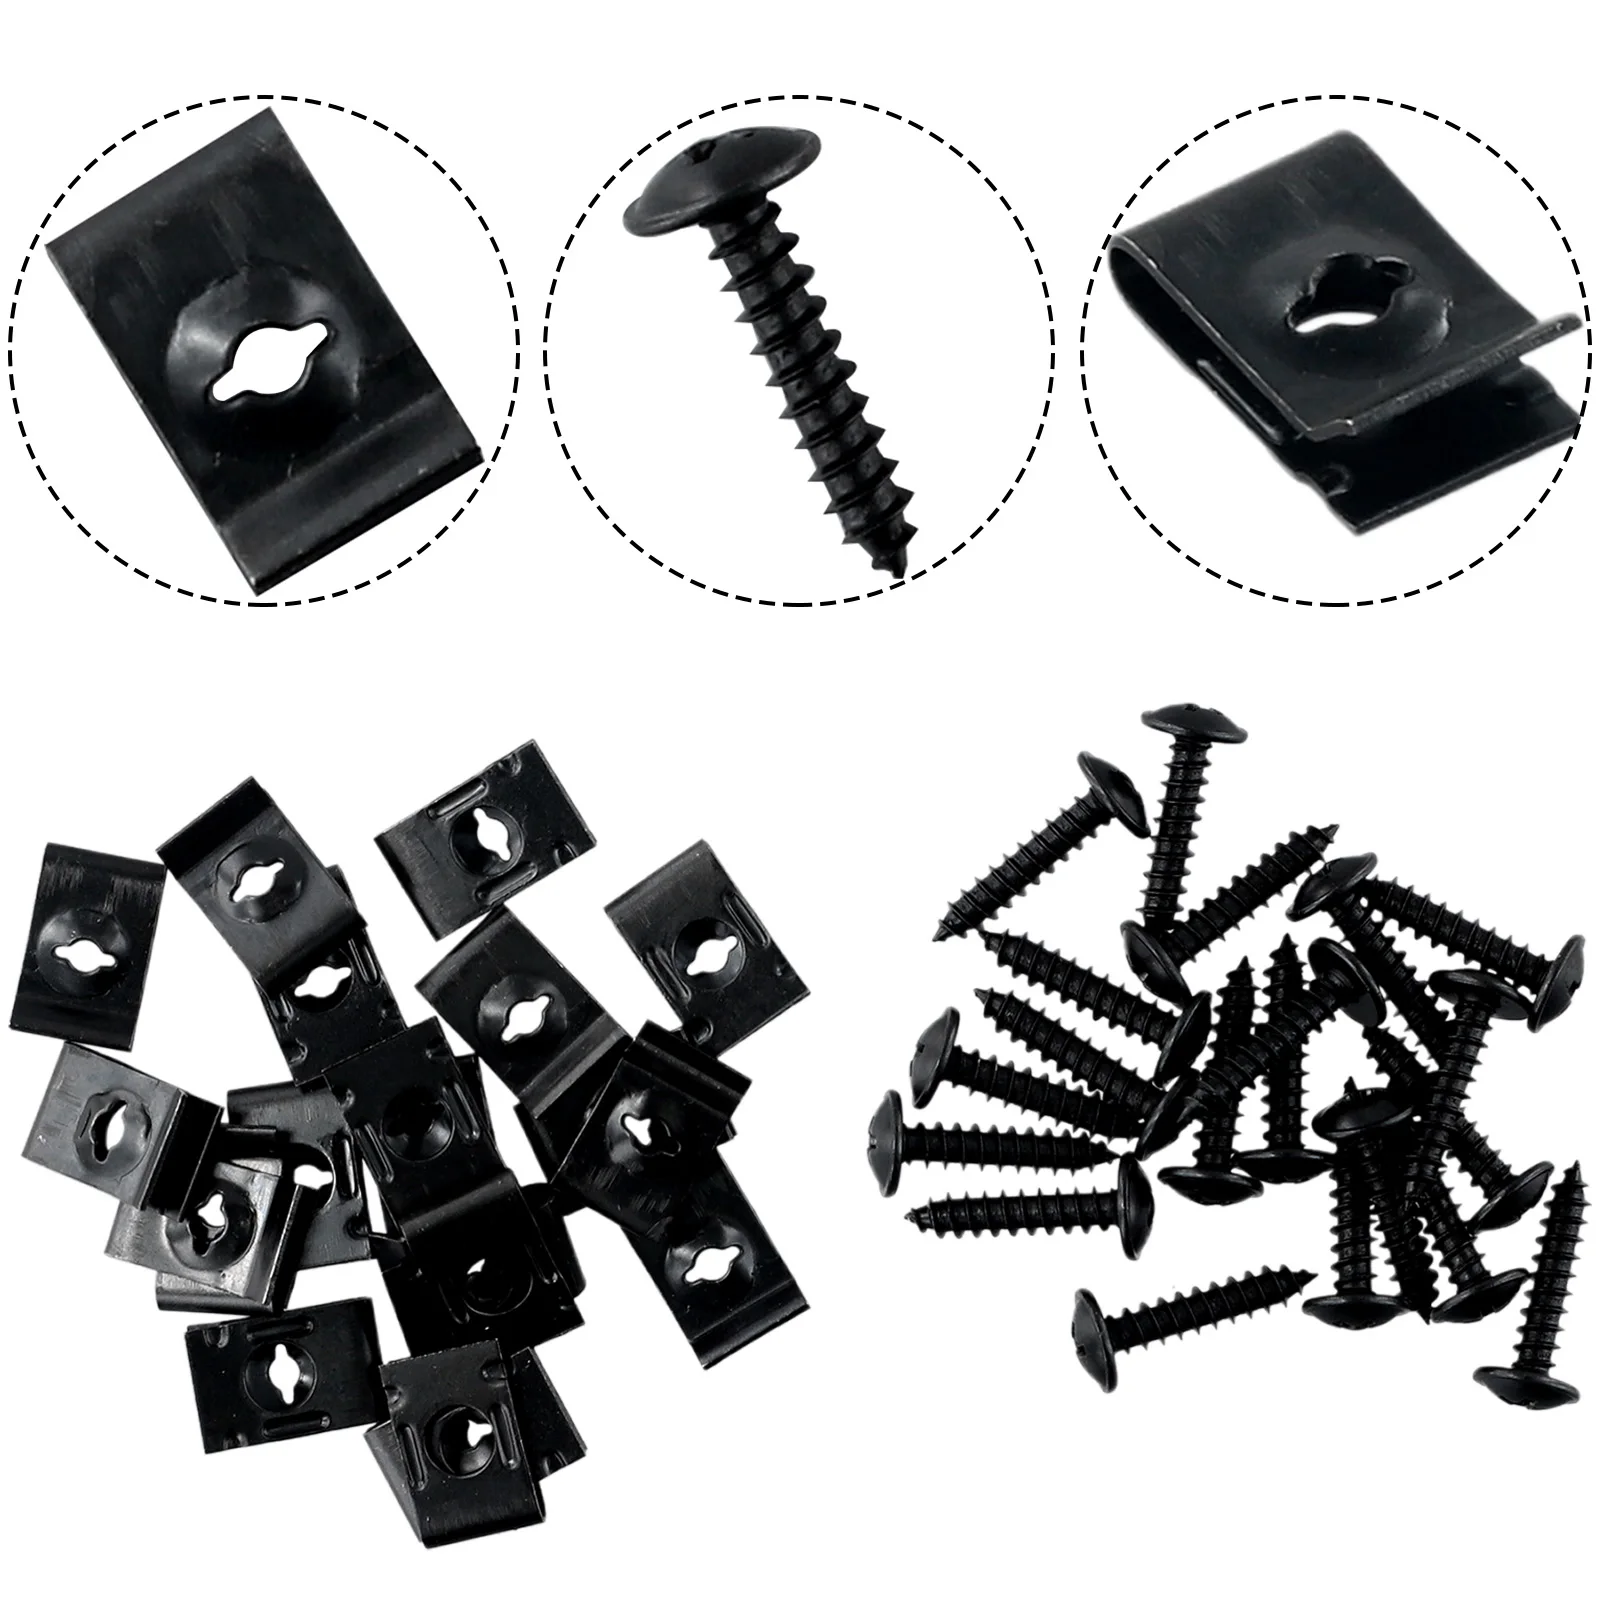 

20Set Metal U-type Clip With Screw Car Bumper Fender Trim Panel Fasteners Perfect To Replace Worn Out,damaged Or Broken Clips